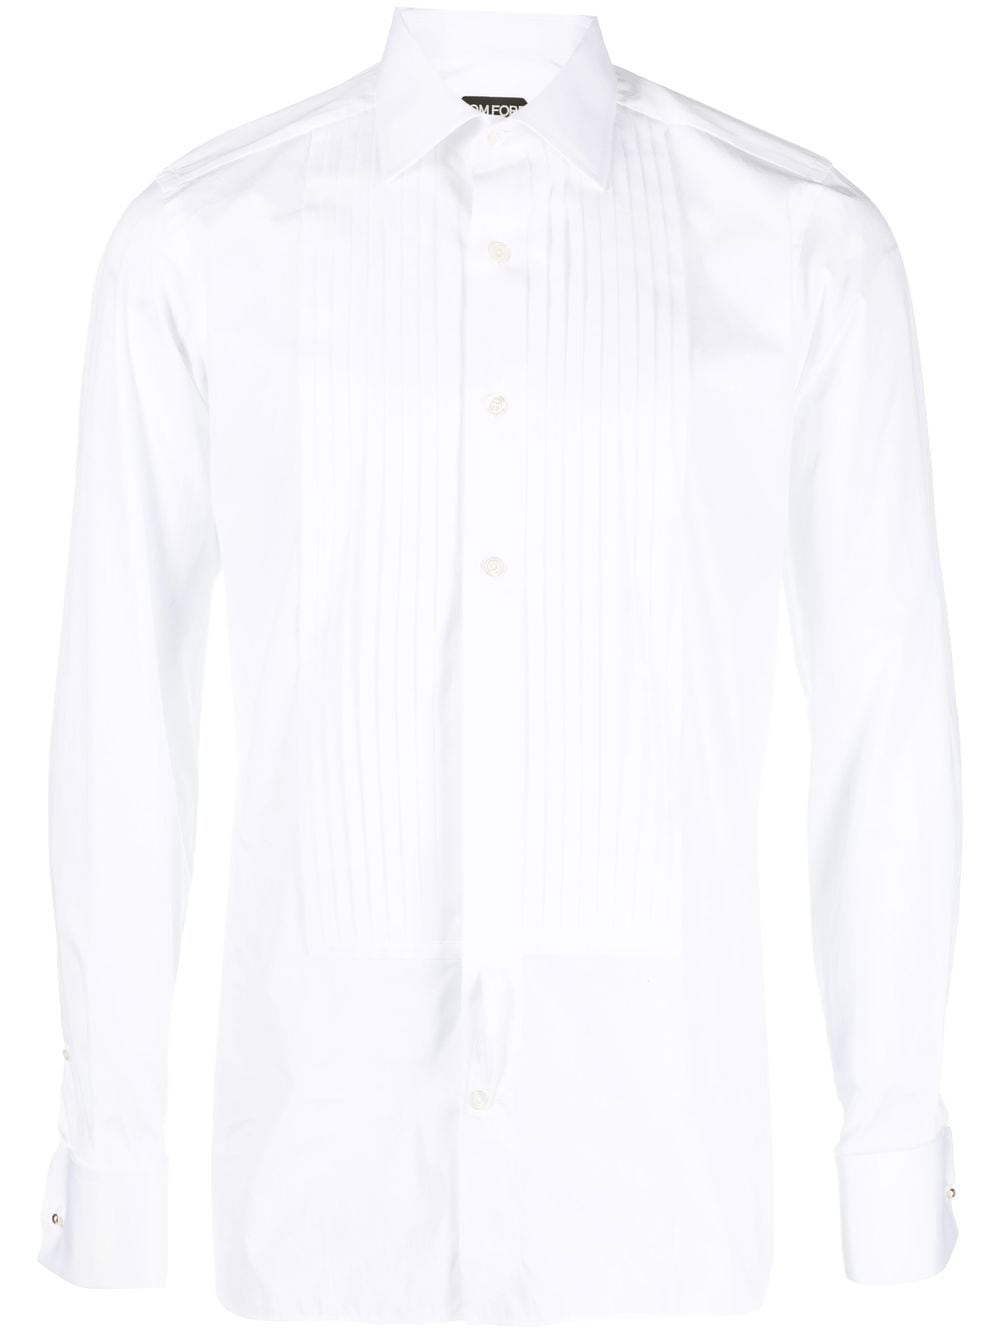 Tom Ford Pleat-detail Cotton Shirt In White Solid